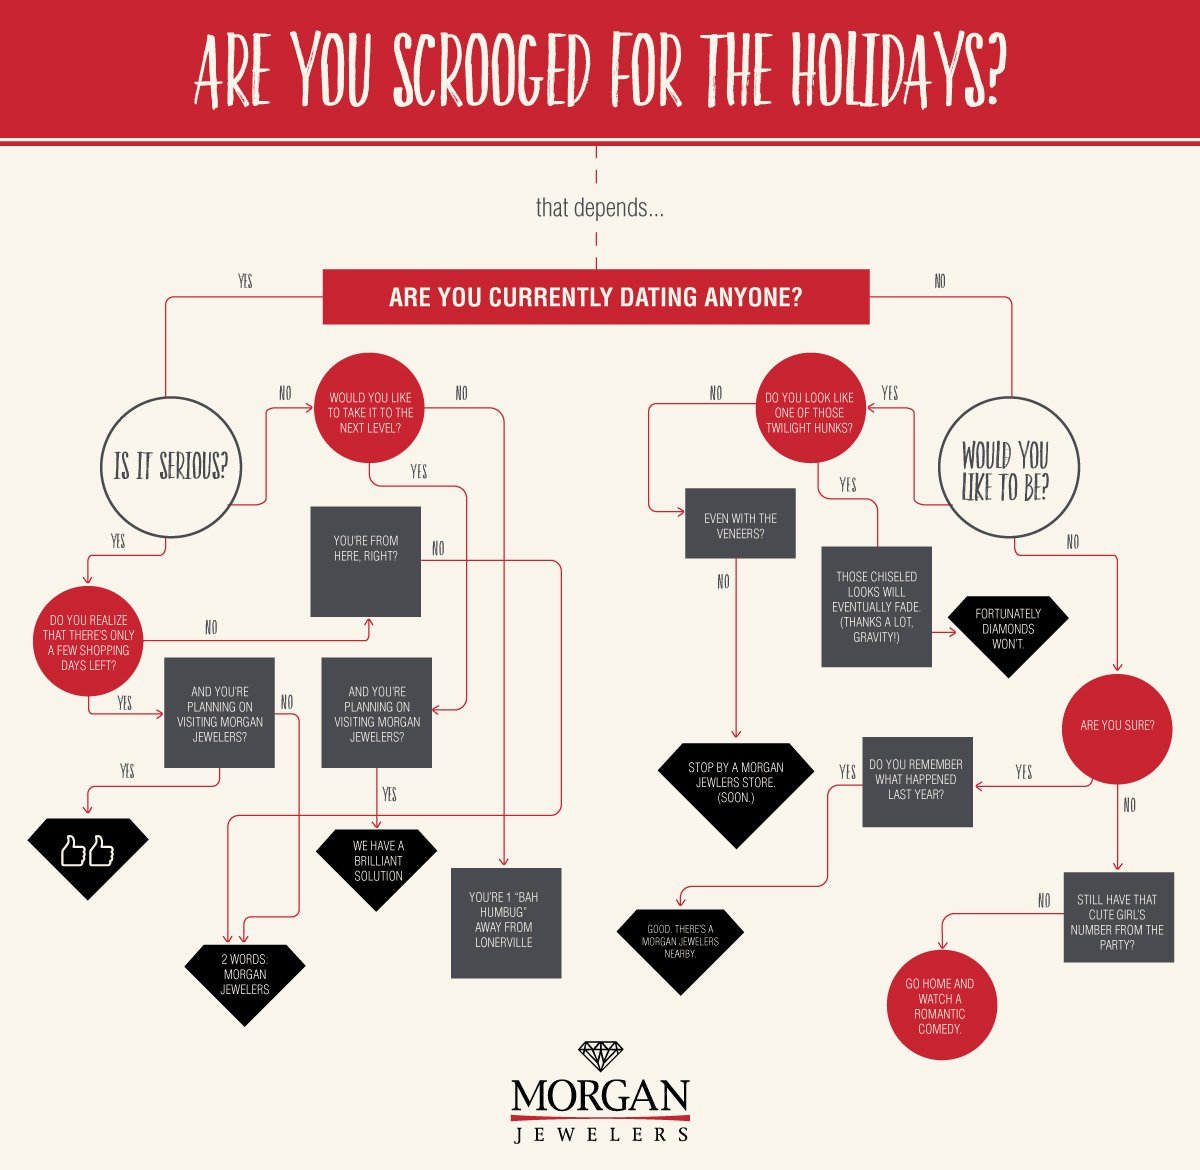 Are you scrooged for the holidays?